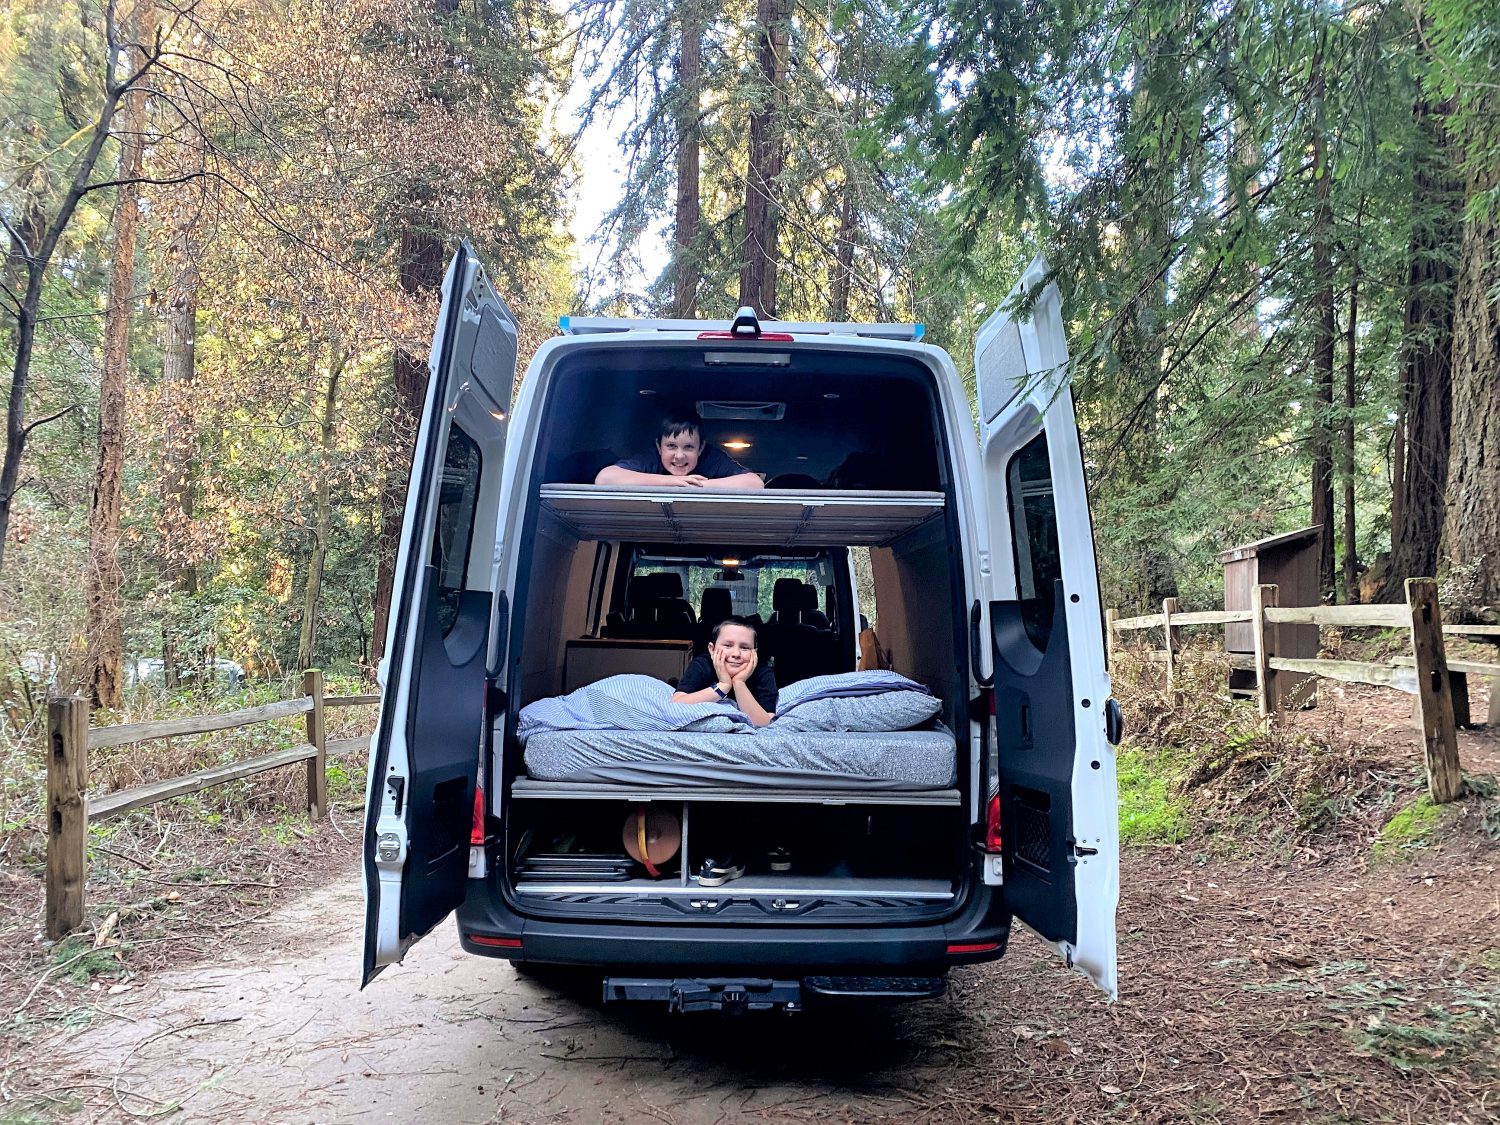 7 Reasons a Camper Van Rental Should Be Your Next Family Adventure